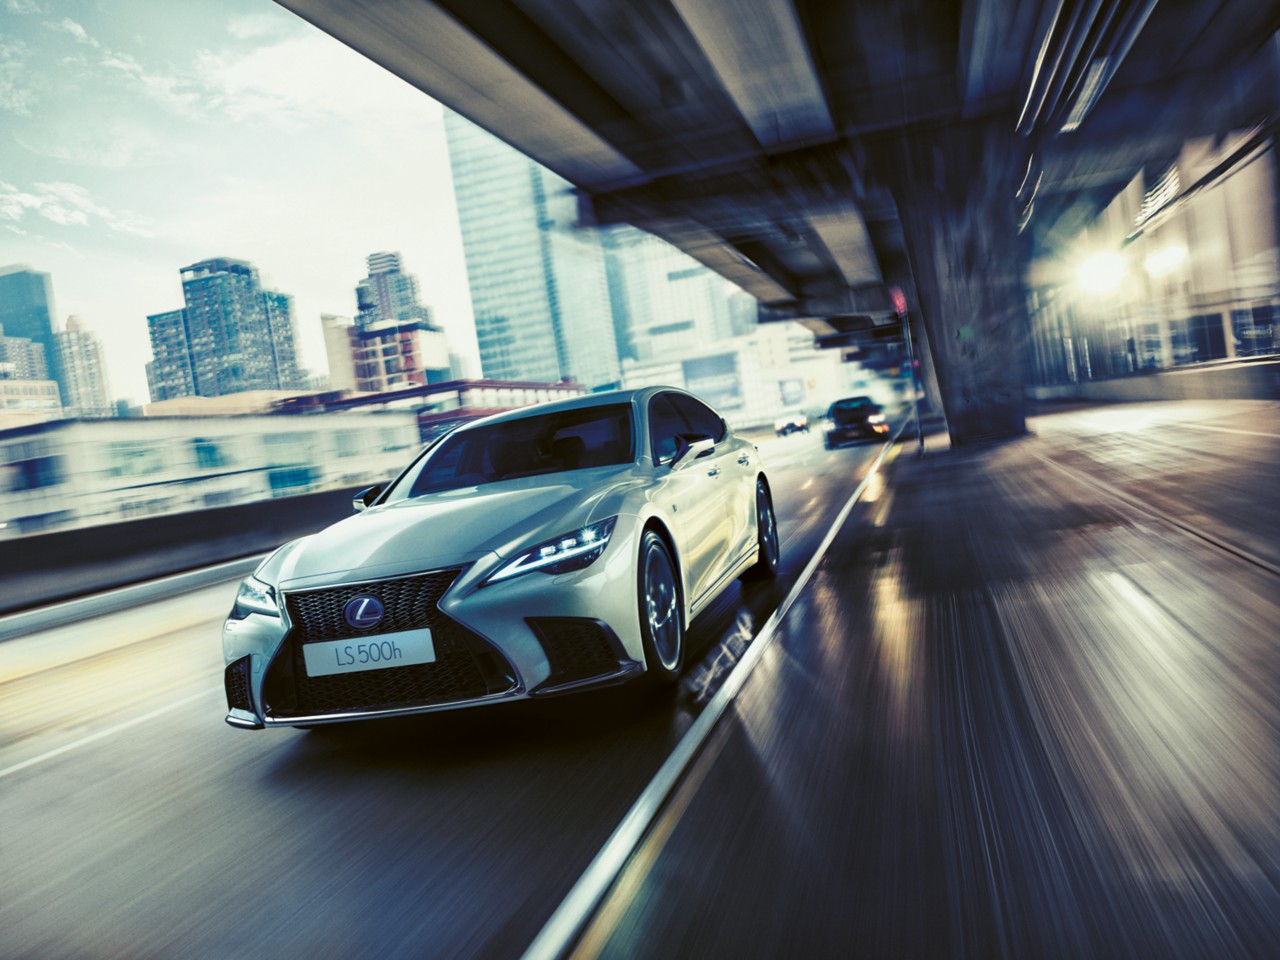 Lexus LS 500h driving in a city location 